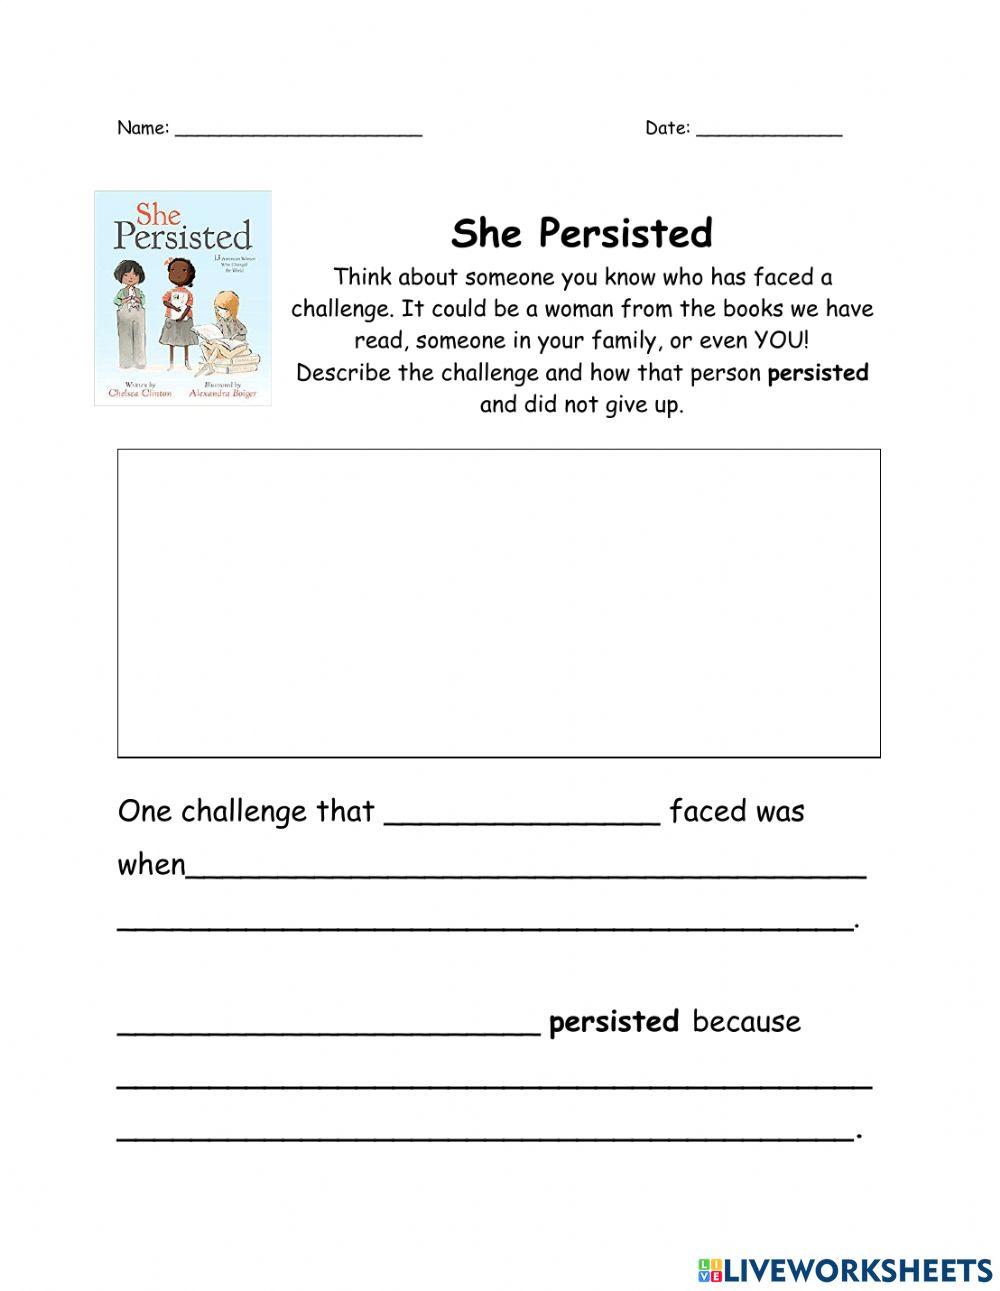 She Persisted-Women's History Month